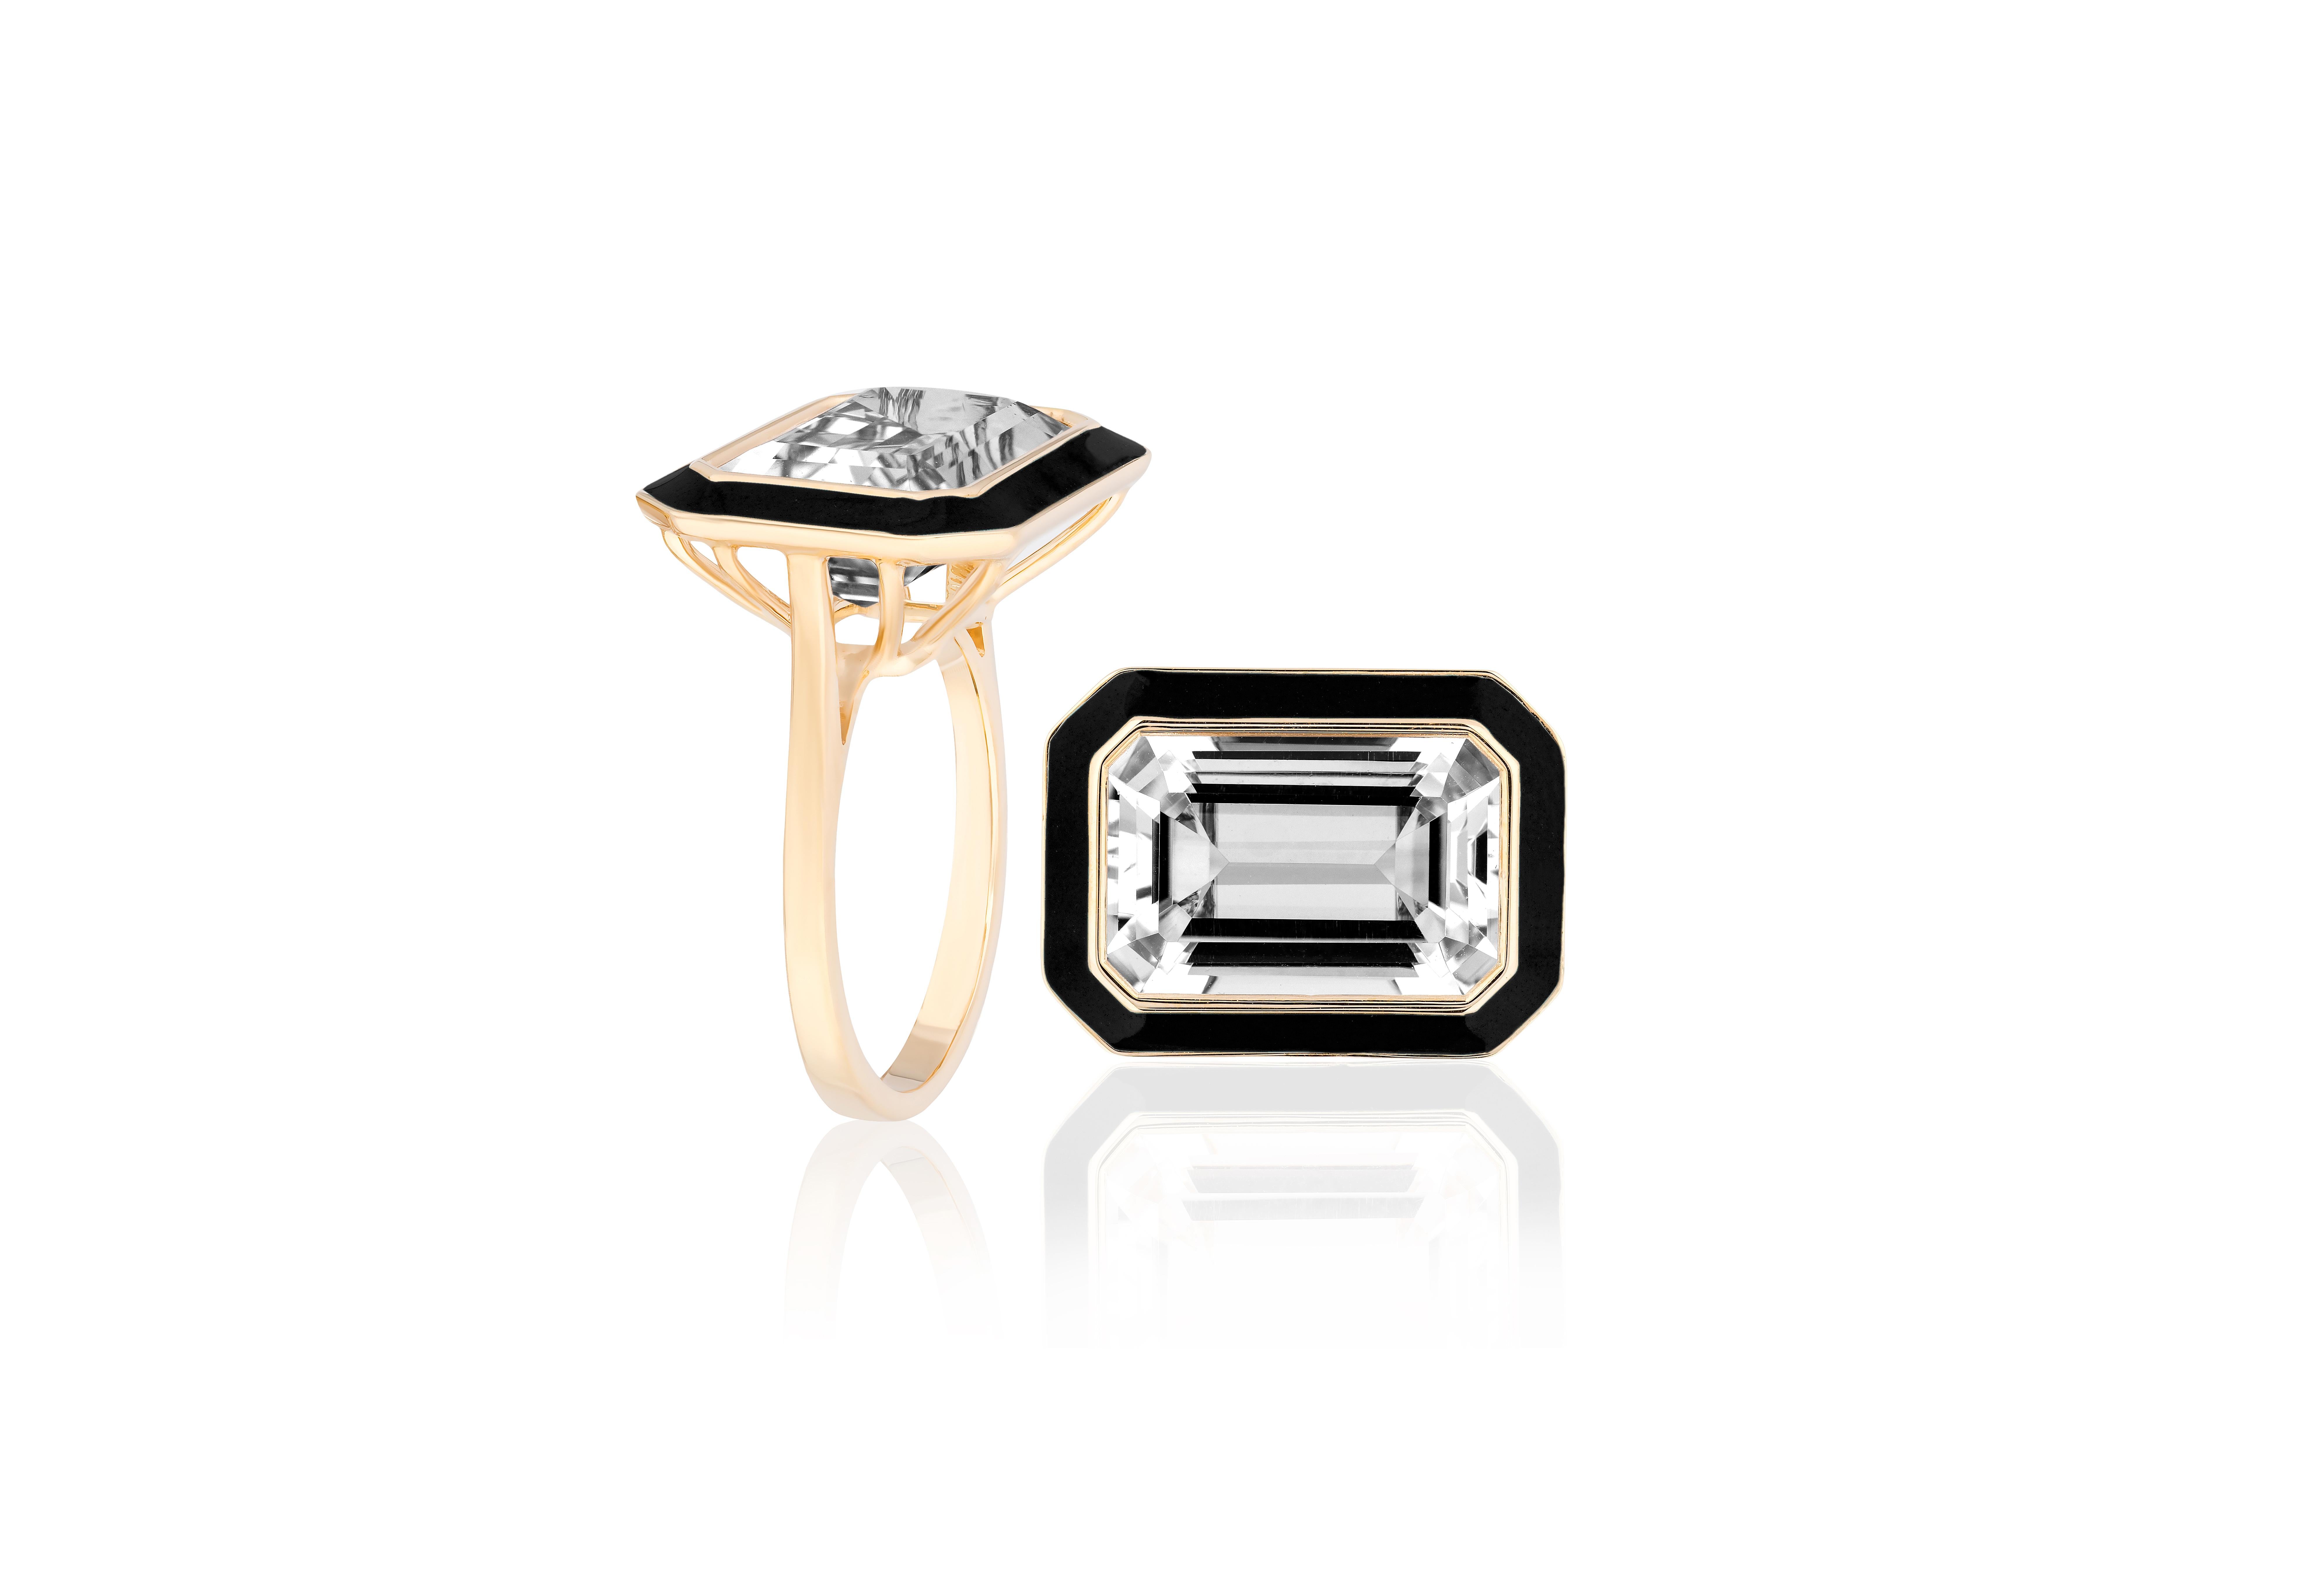 East-West Rock Crystal Ring with Black Enamel in 18K Yellow Gold, from 'Queen' Collection. The combination of enamel and Rock Crystal represents power, richness and passion of a true Queen. The feeling of luxury is what we’re aiming for. This will